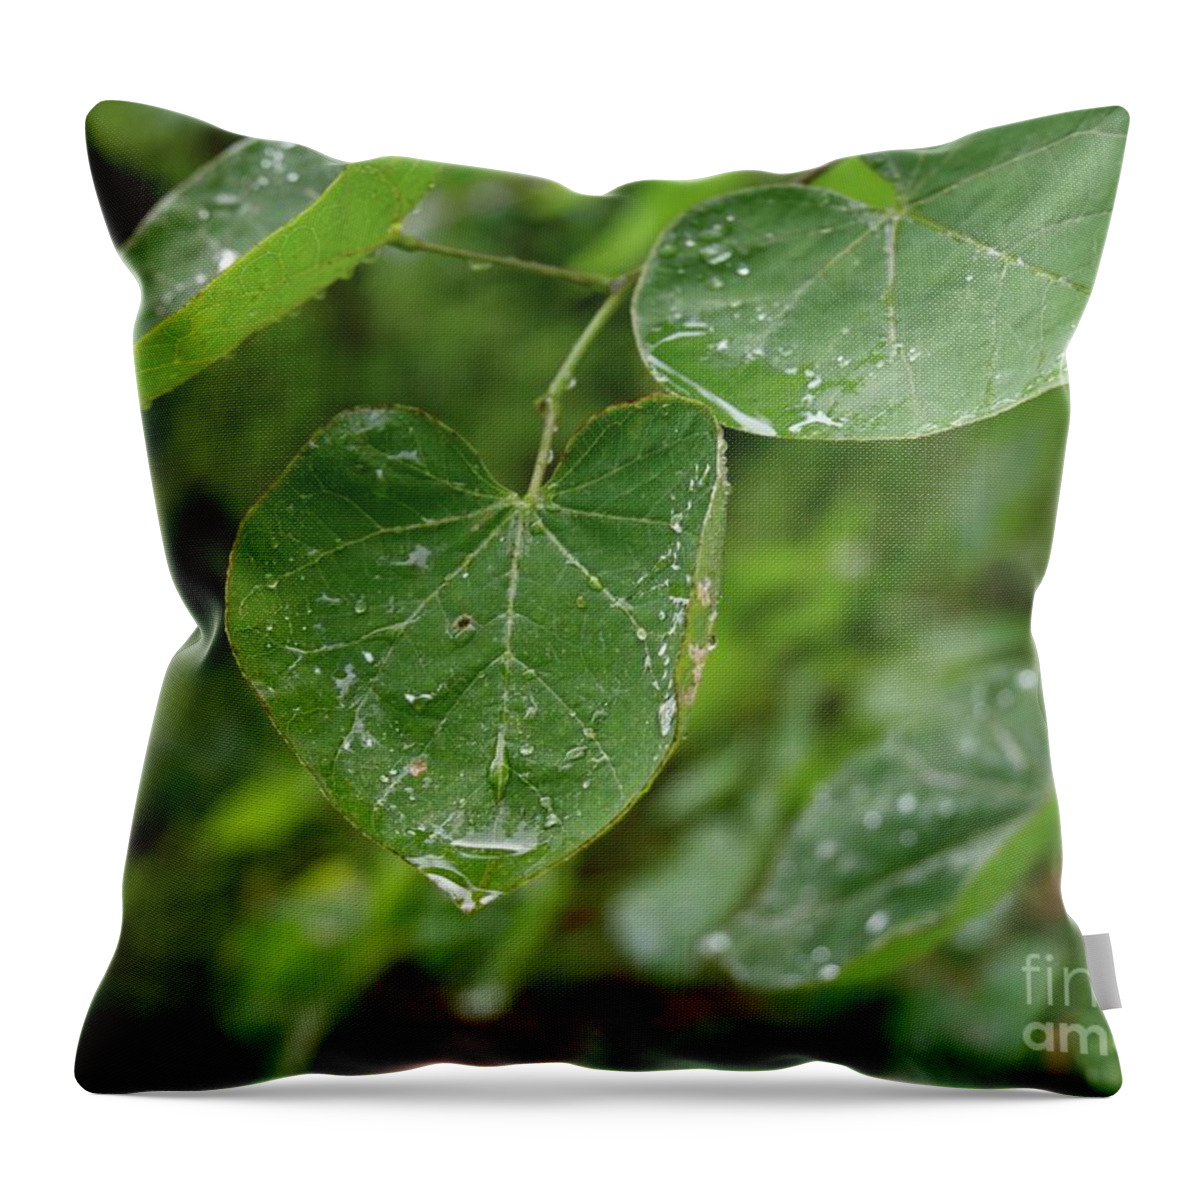 Abstract Throw Pillow featuring the photograph Dripping by On da Raks